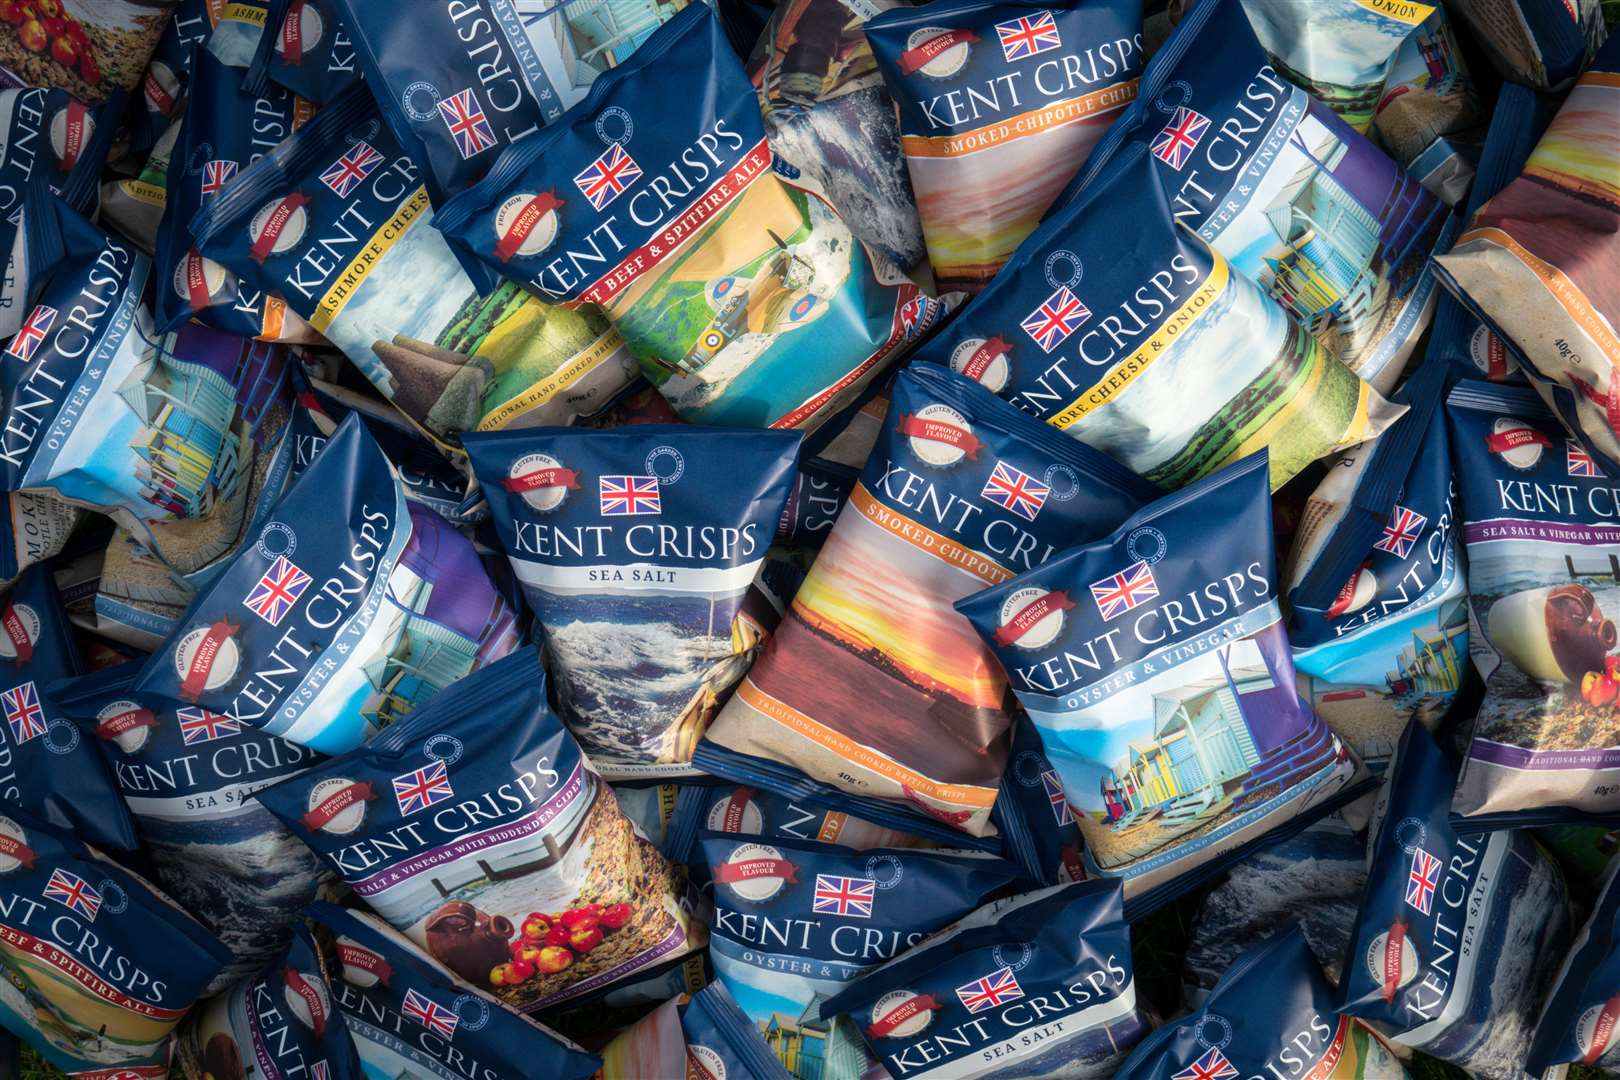 In the last two years, Kent Crisps has launched new flavours and rebranded their entire range